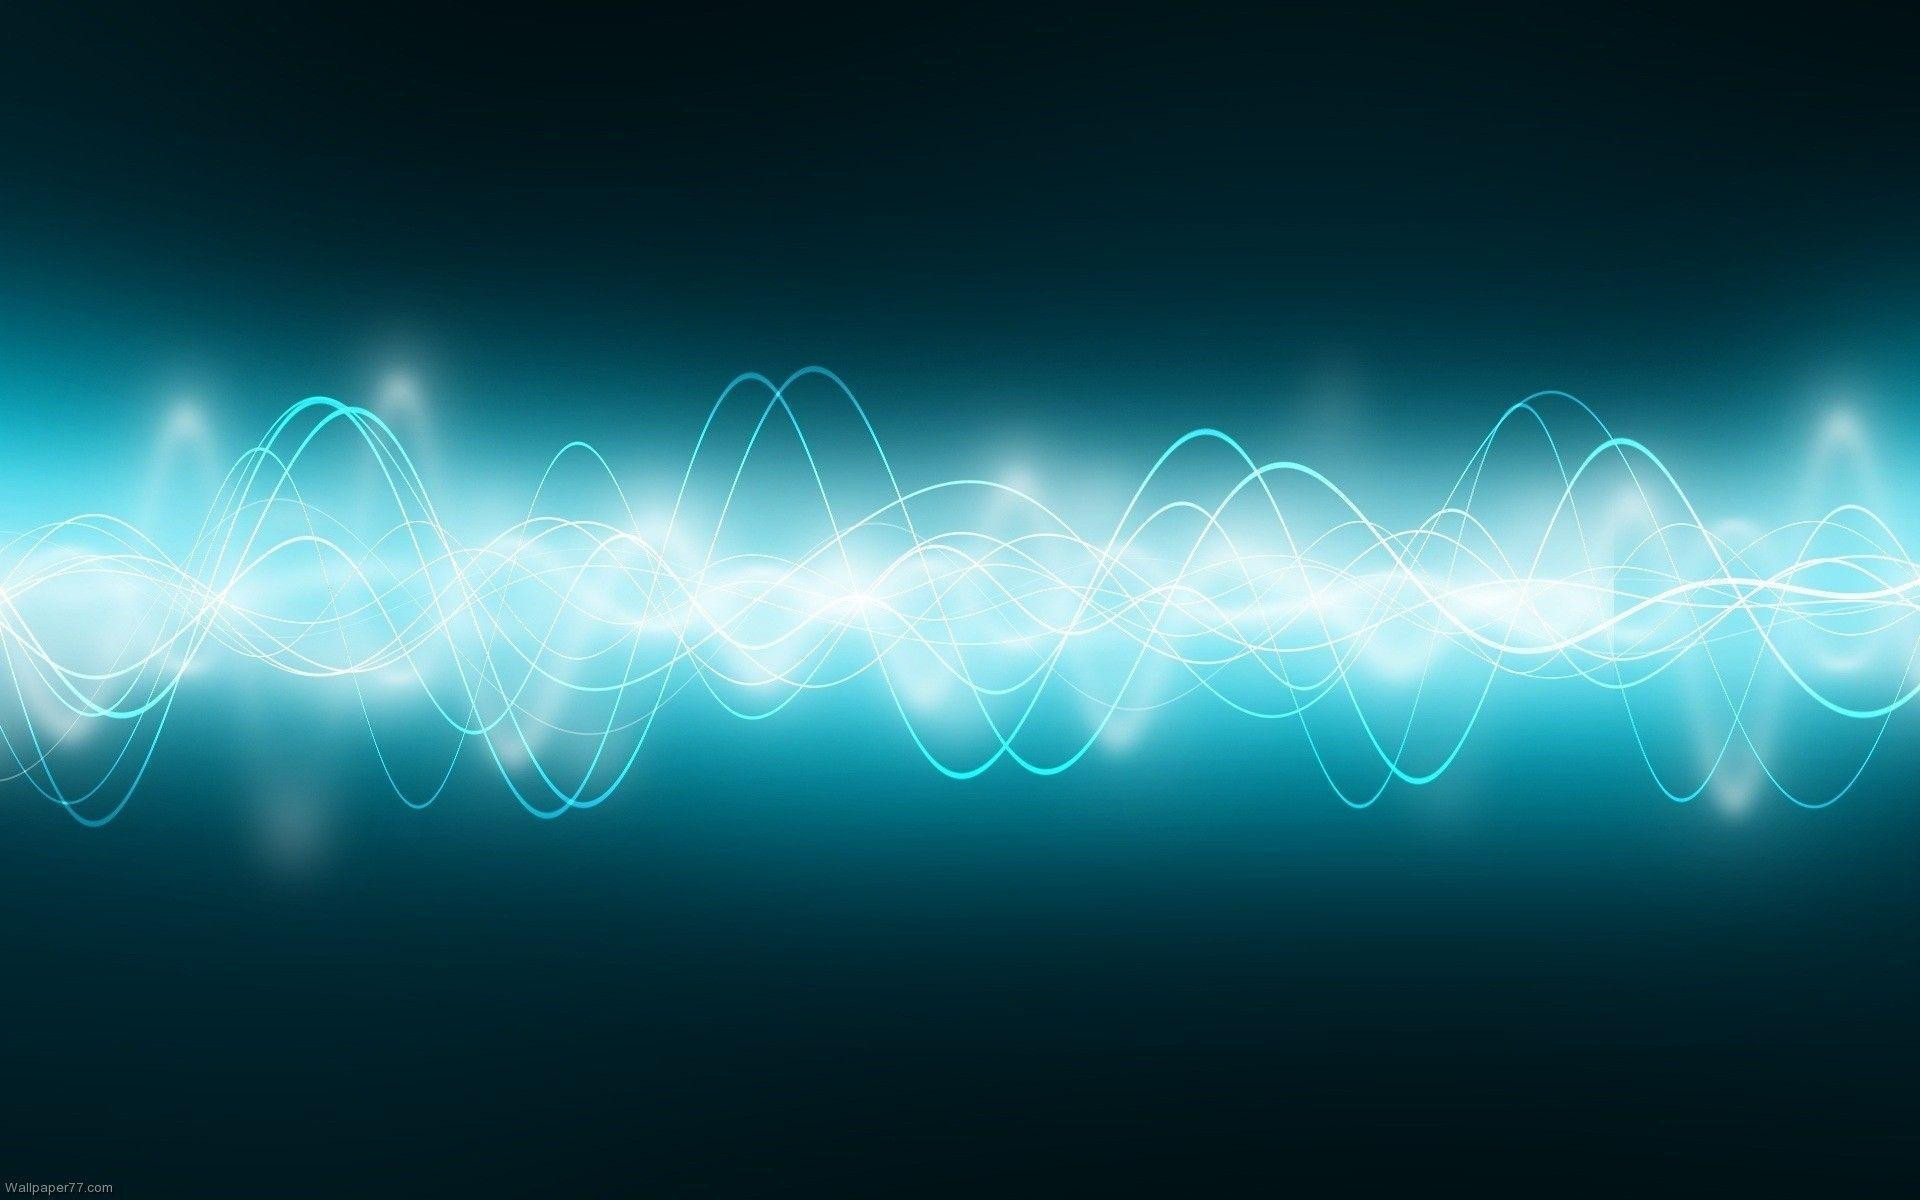 1920x1200 Sound Wave Wallpaper Incredible sound Waves Wallpapers Wallpaper Cave